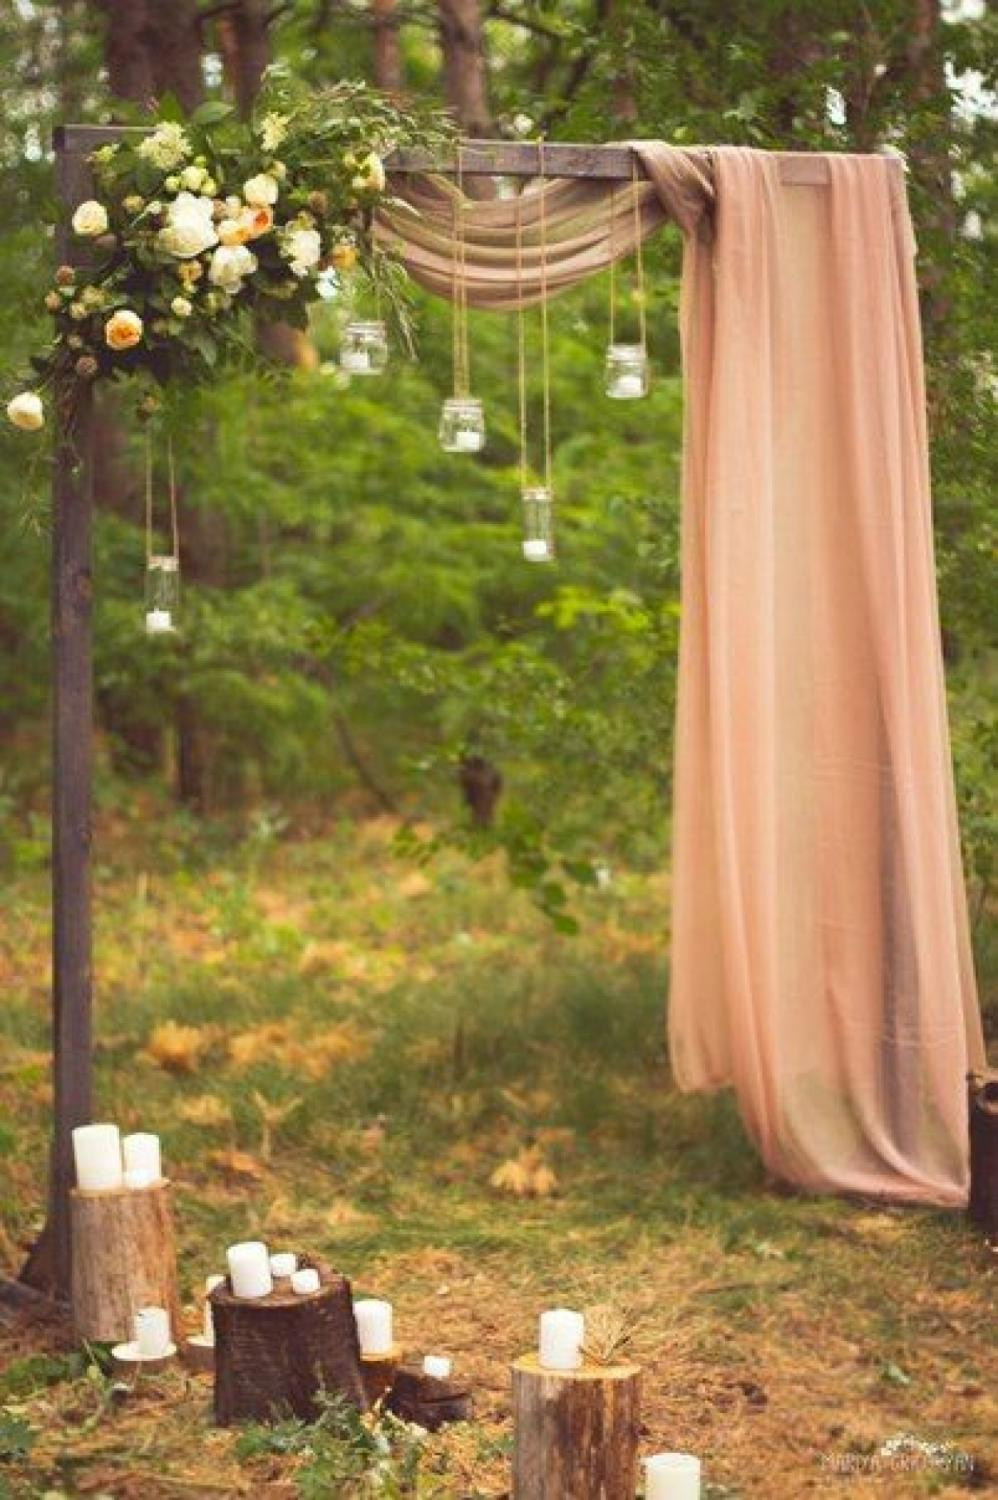 How To Decorate A Wedding Arch
 30 Best Floral Wedding Altars & Arches Decorating Ideas